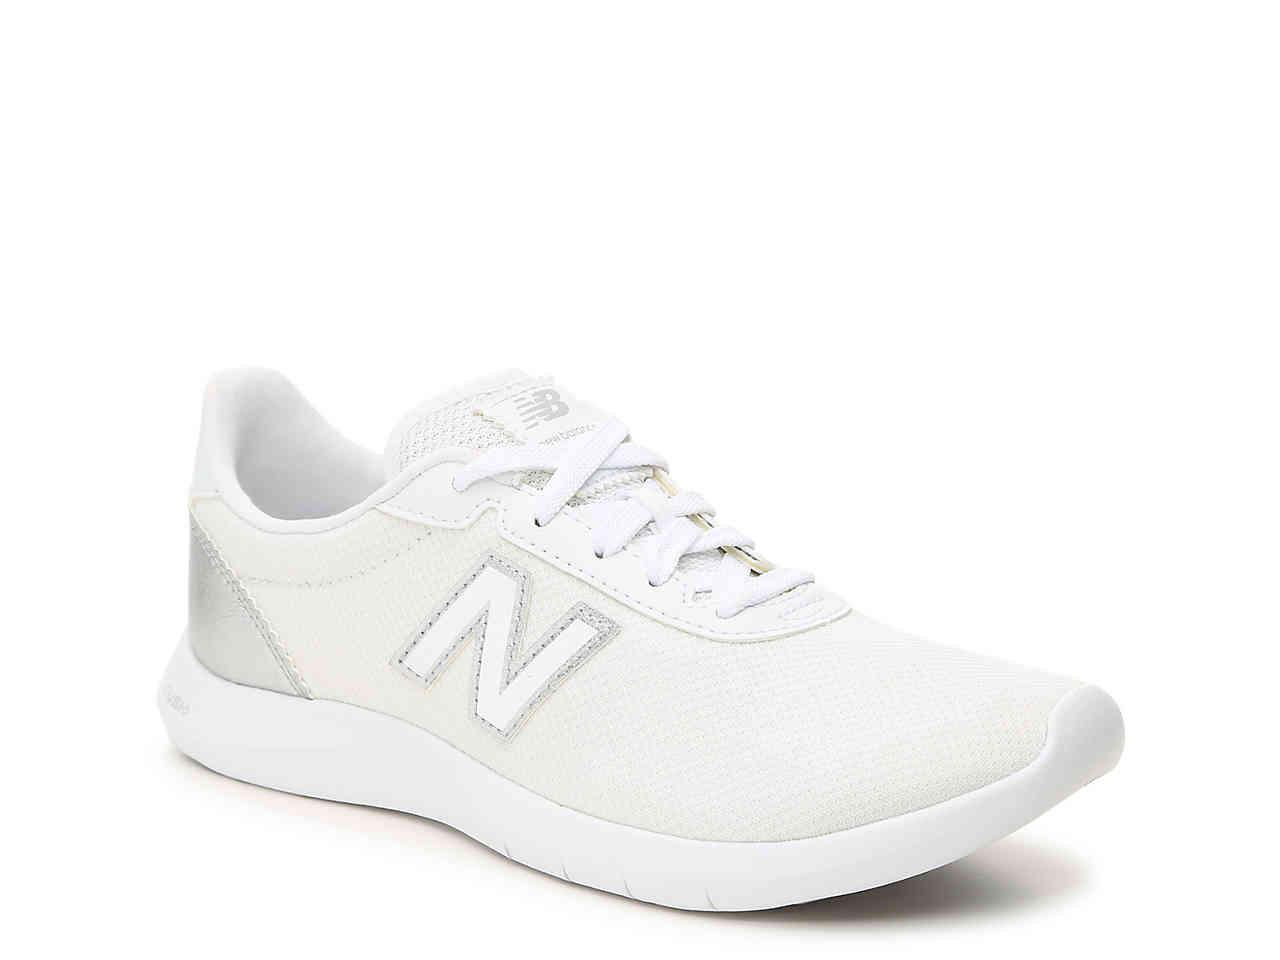 New Balance 514 Sneaker in White/Silver 